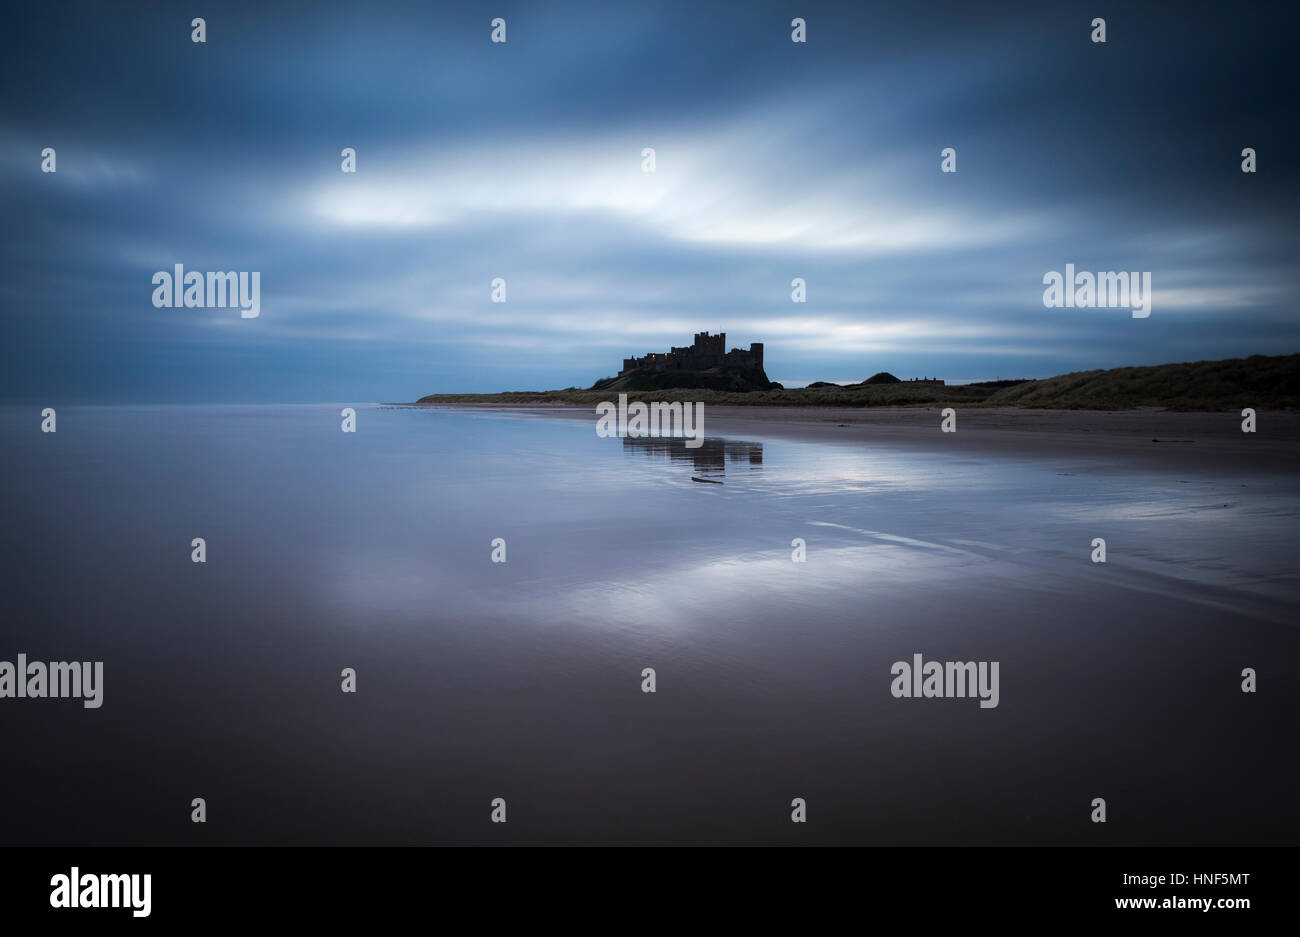 Bamburgh Castle on the Northumberland coast, captured during a long exposure photograph at dawn. Stock Photo